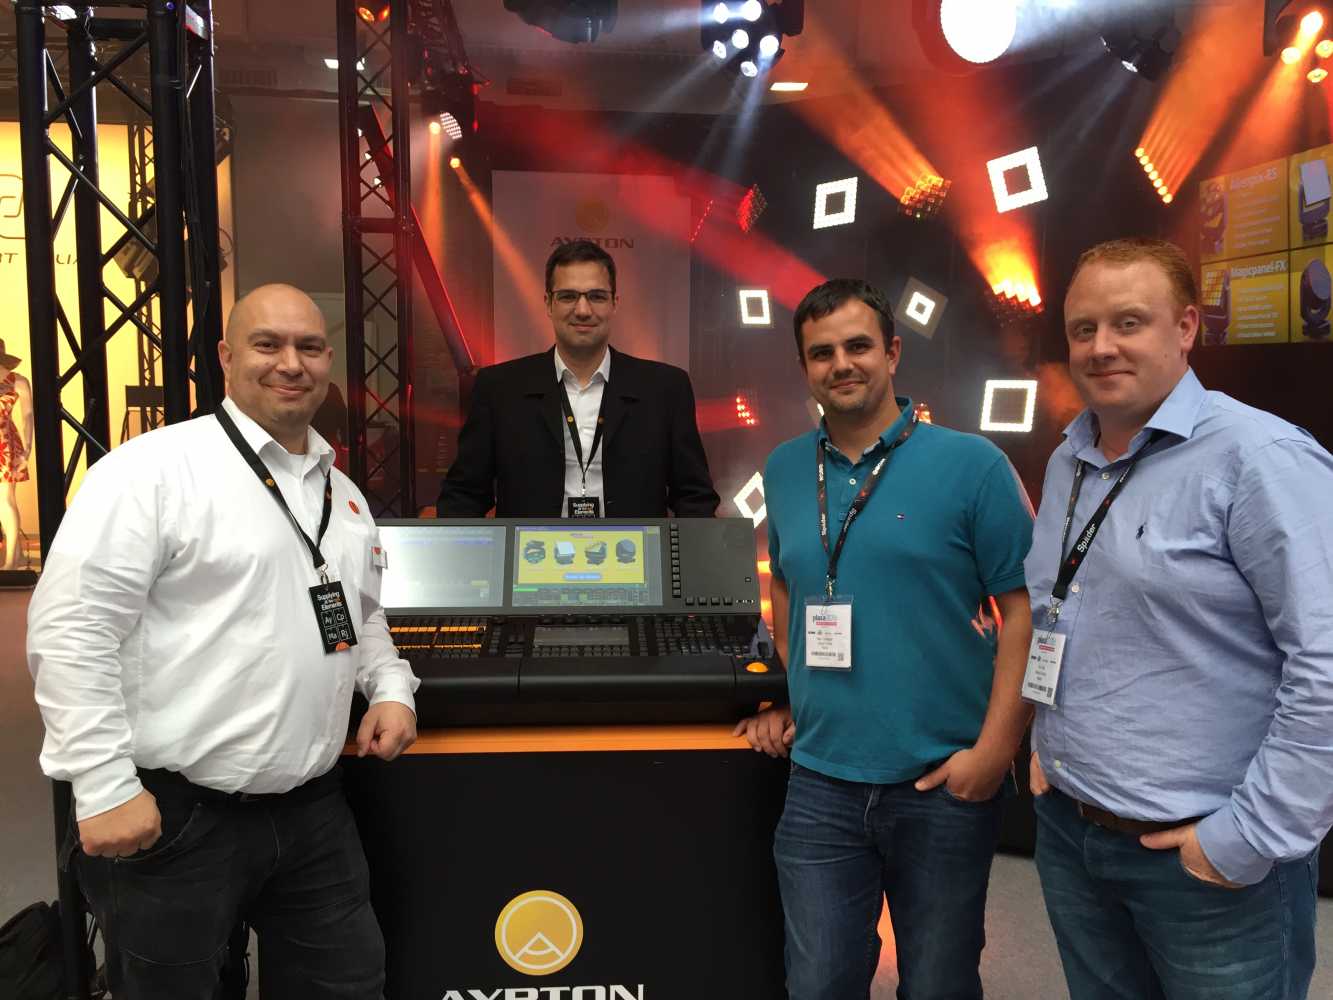 Thor Andre’, Ambersphere technical sales, Rene Berhorst, MA product manager Marc Callaghan and Kris Box from Liteup Events